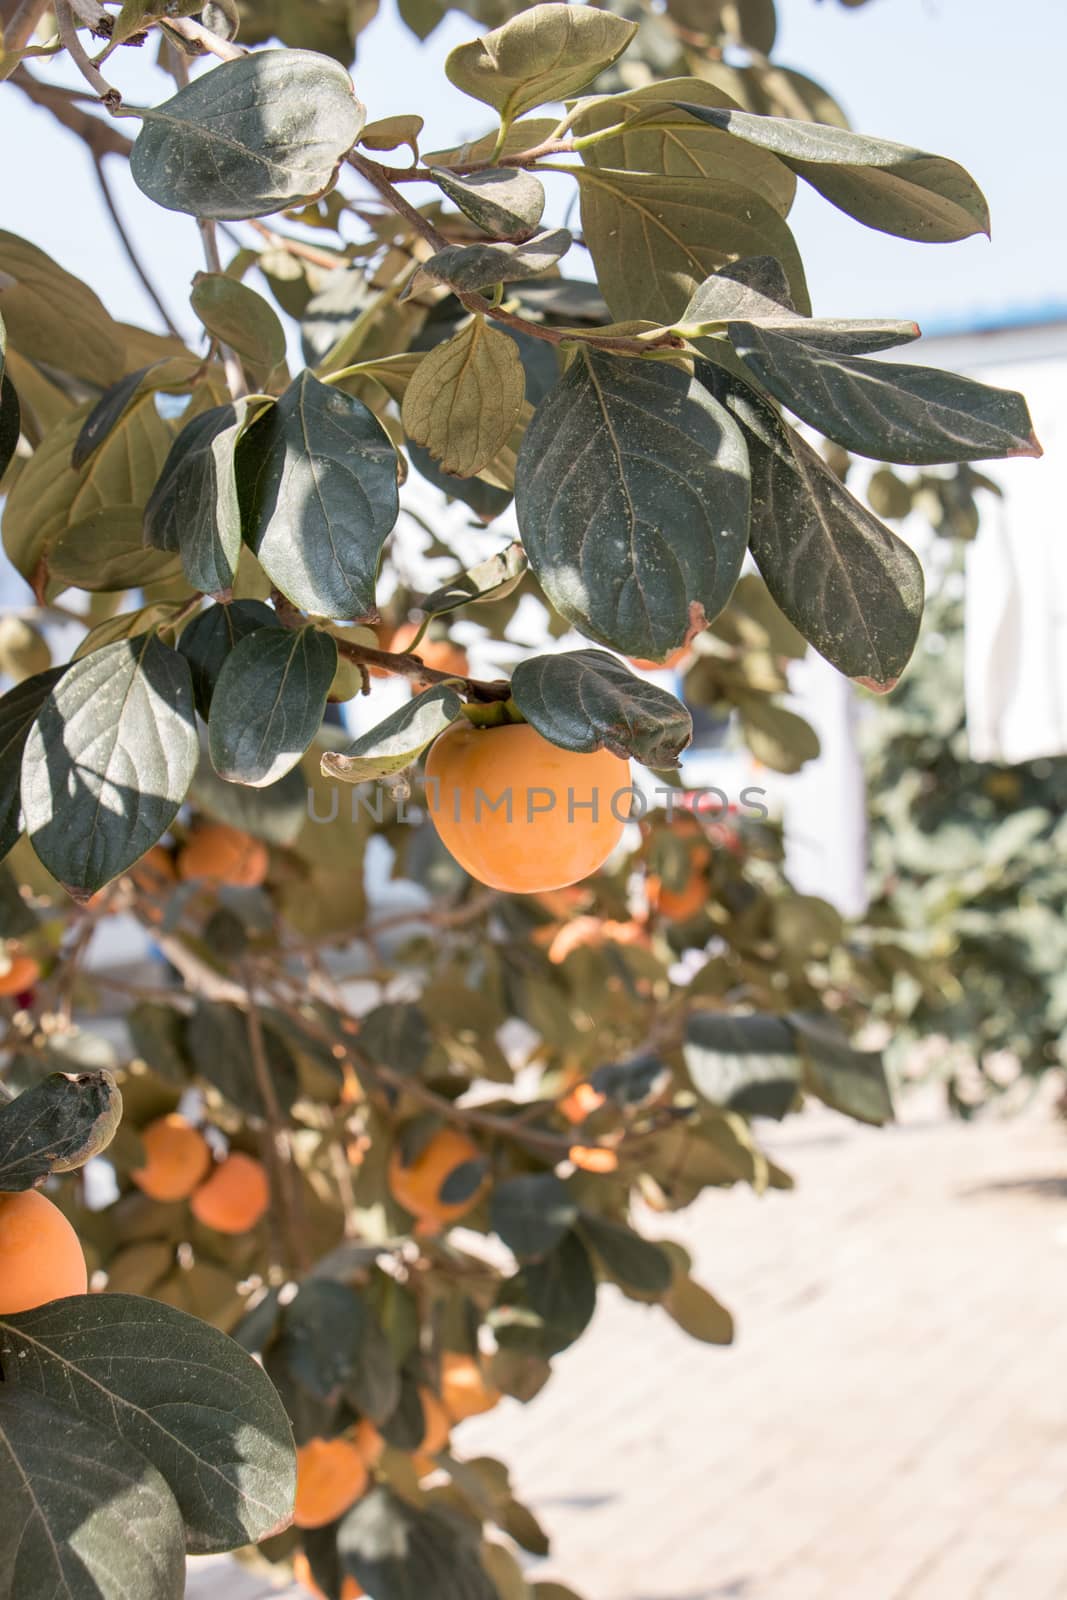 agriculture, apple, apples, autumn, branch, food, fresh, fruit, fruits, garden, green, harvest, healthy, leaf, leaves, natural, nature, orchard, organic, peach, plant, red, ripe, summer, tree